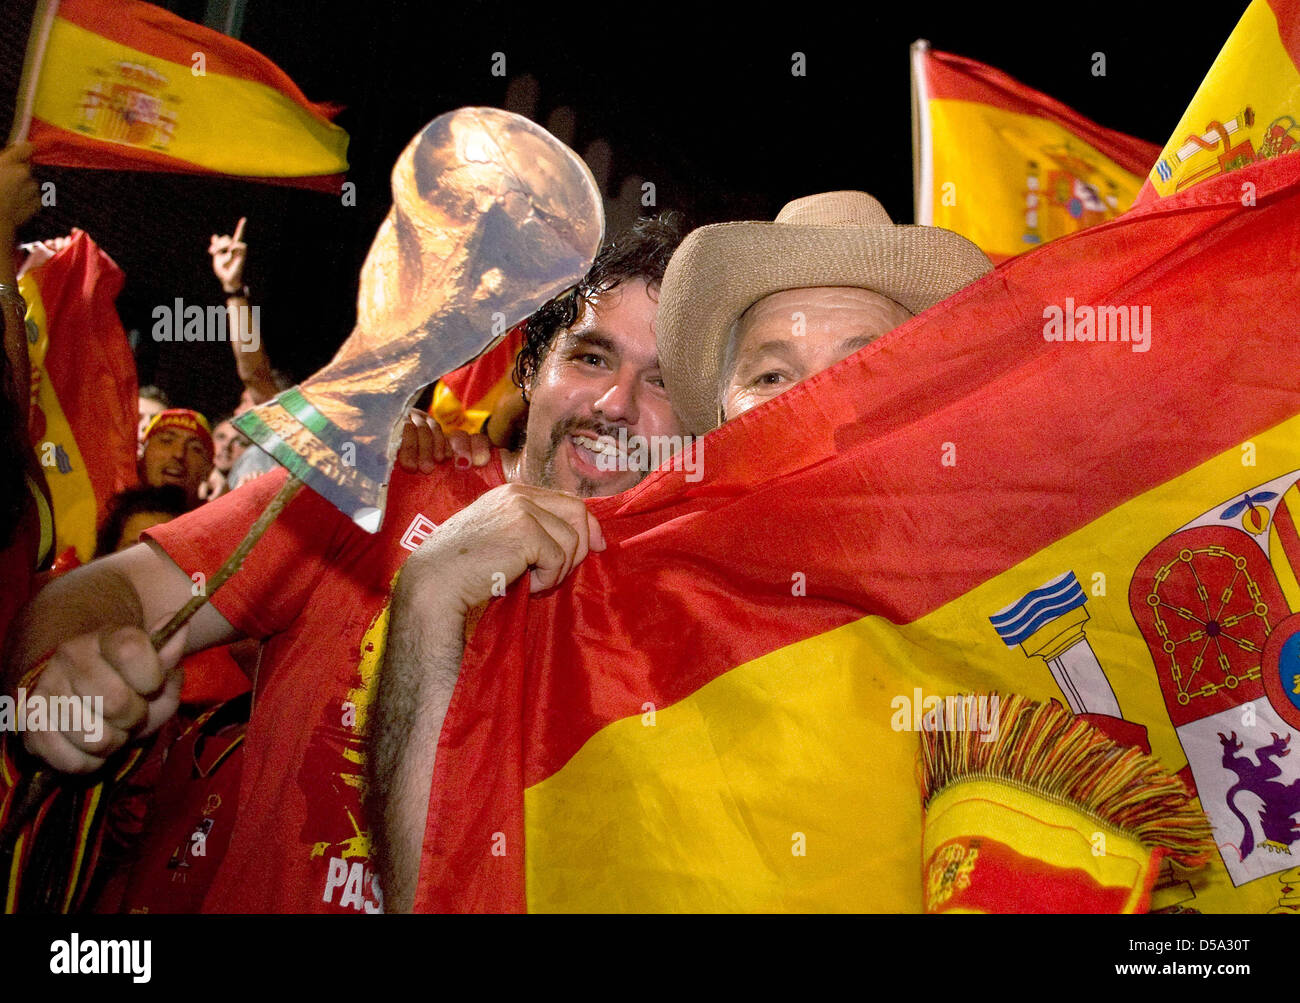 With flags and a cardboard World Cup, Spanish fans celebrate the victory of their team of the final match Spain vs. the Netherlands of the 19th FIFA World Cup 2010 on the streets of Hannover, Germany, 11 July 2010. Spain won against the Netherlands 1-0 and is World Champion for the first time. Photo: Michael Löwa Stock Photo